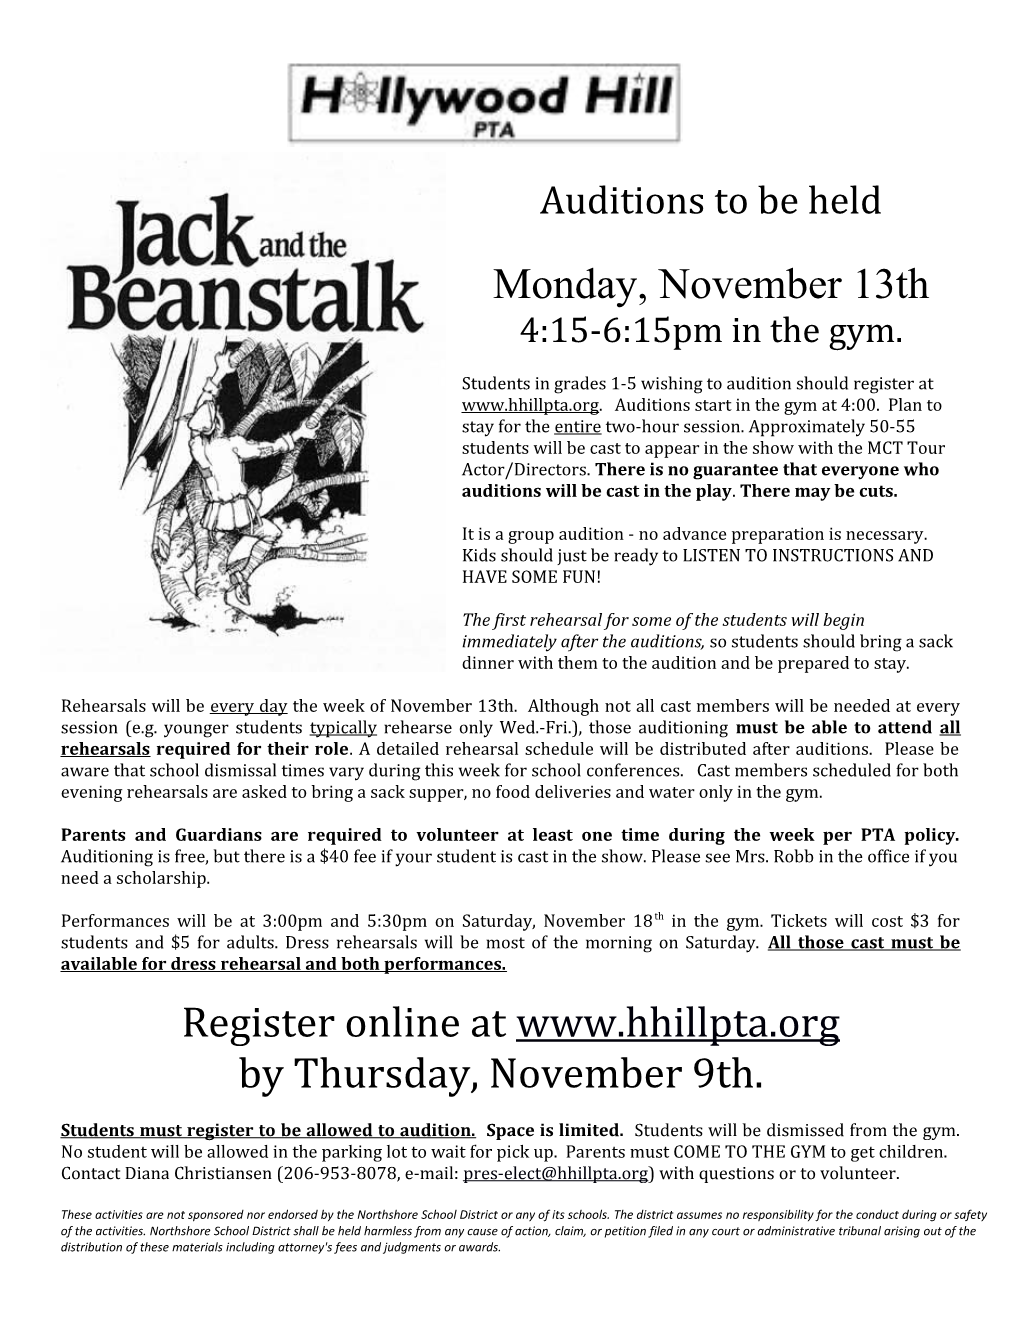 Auditions to Be Held